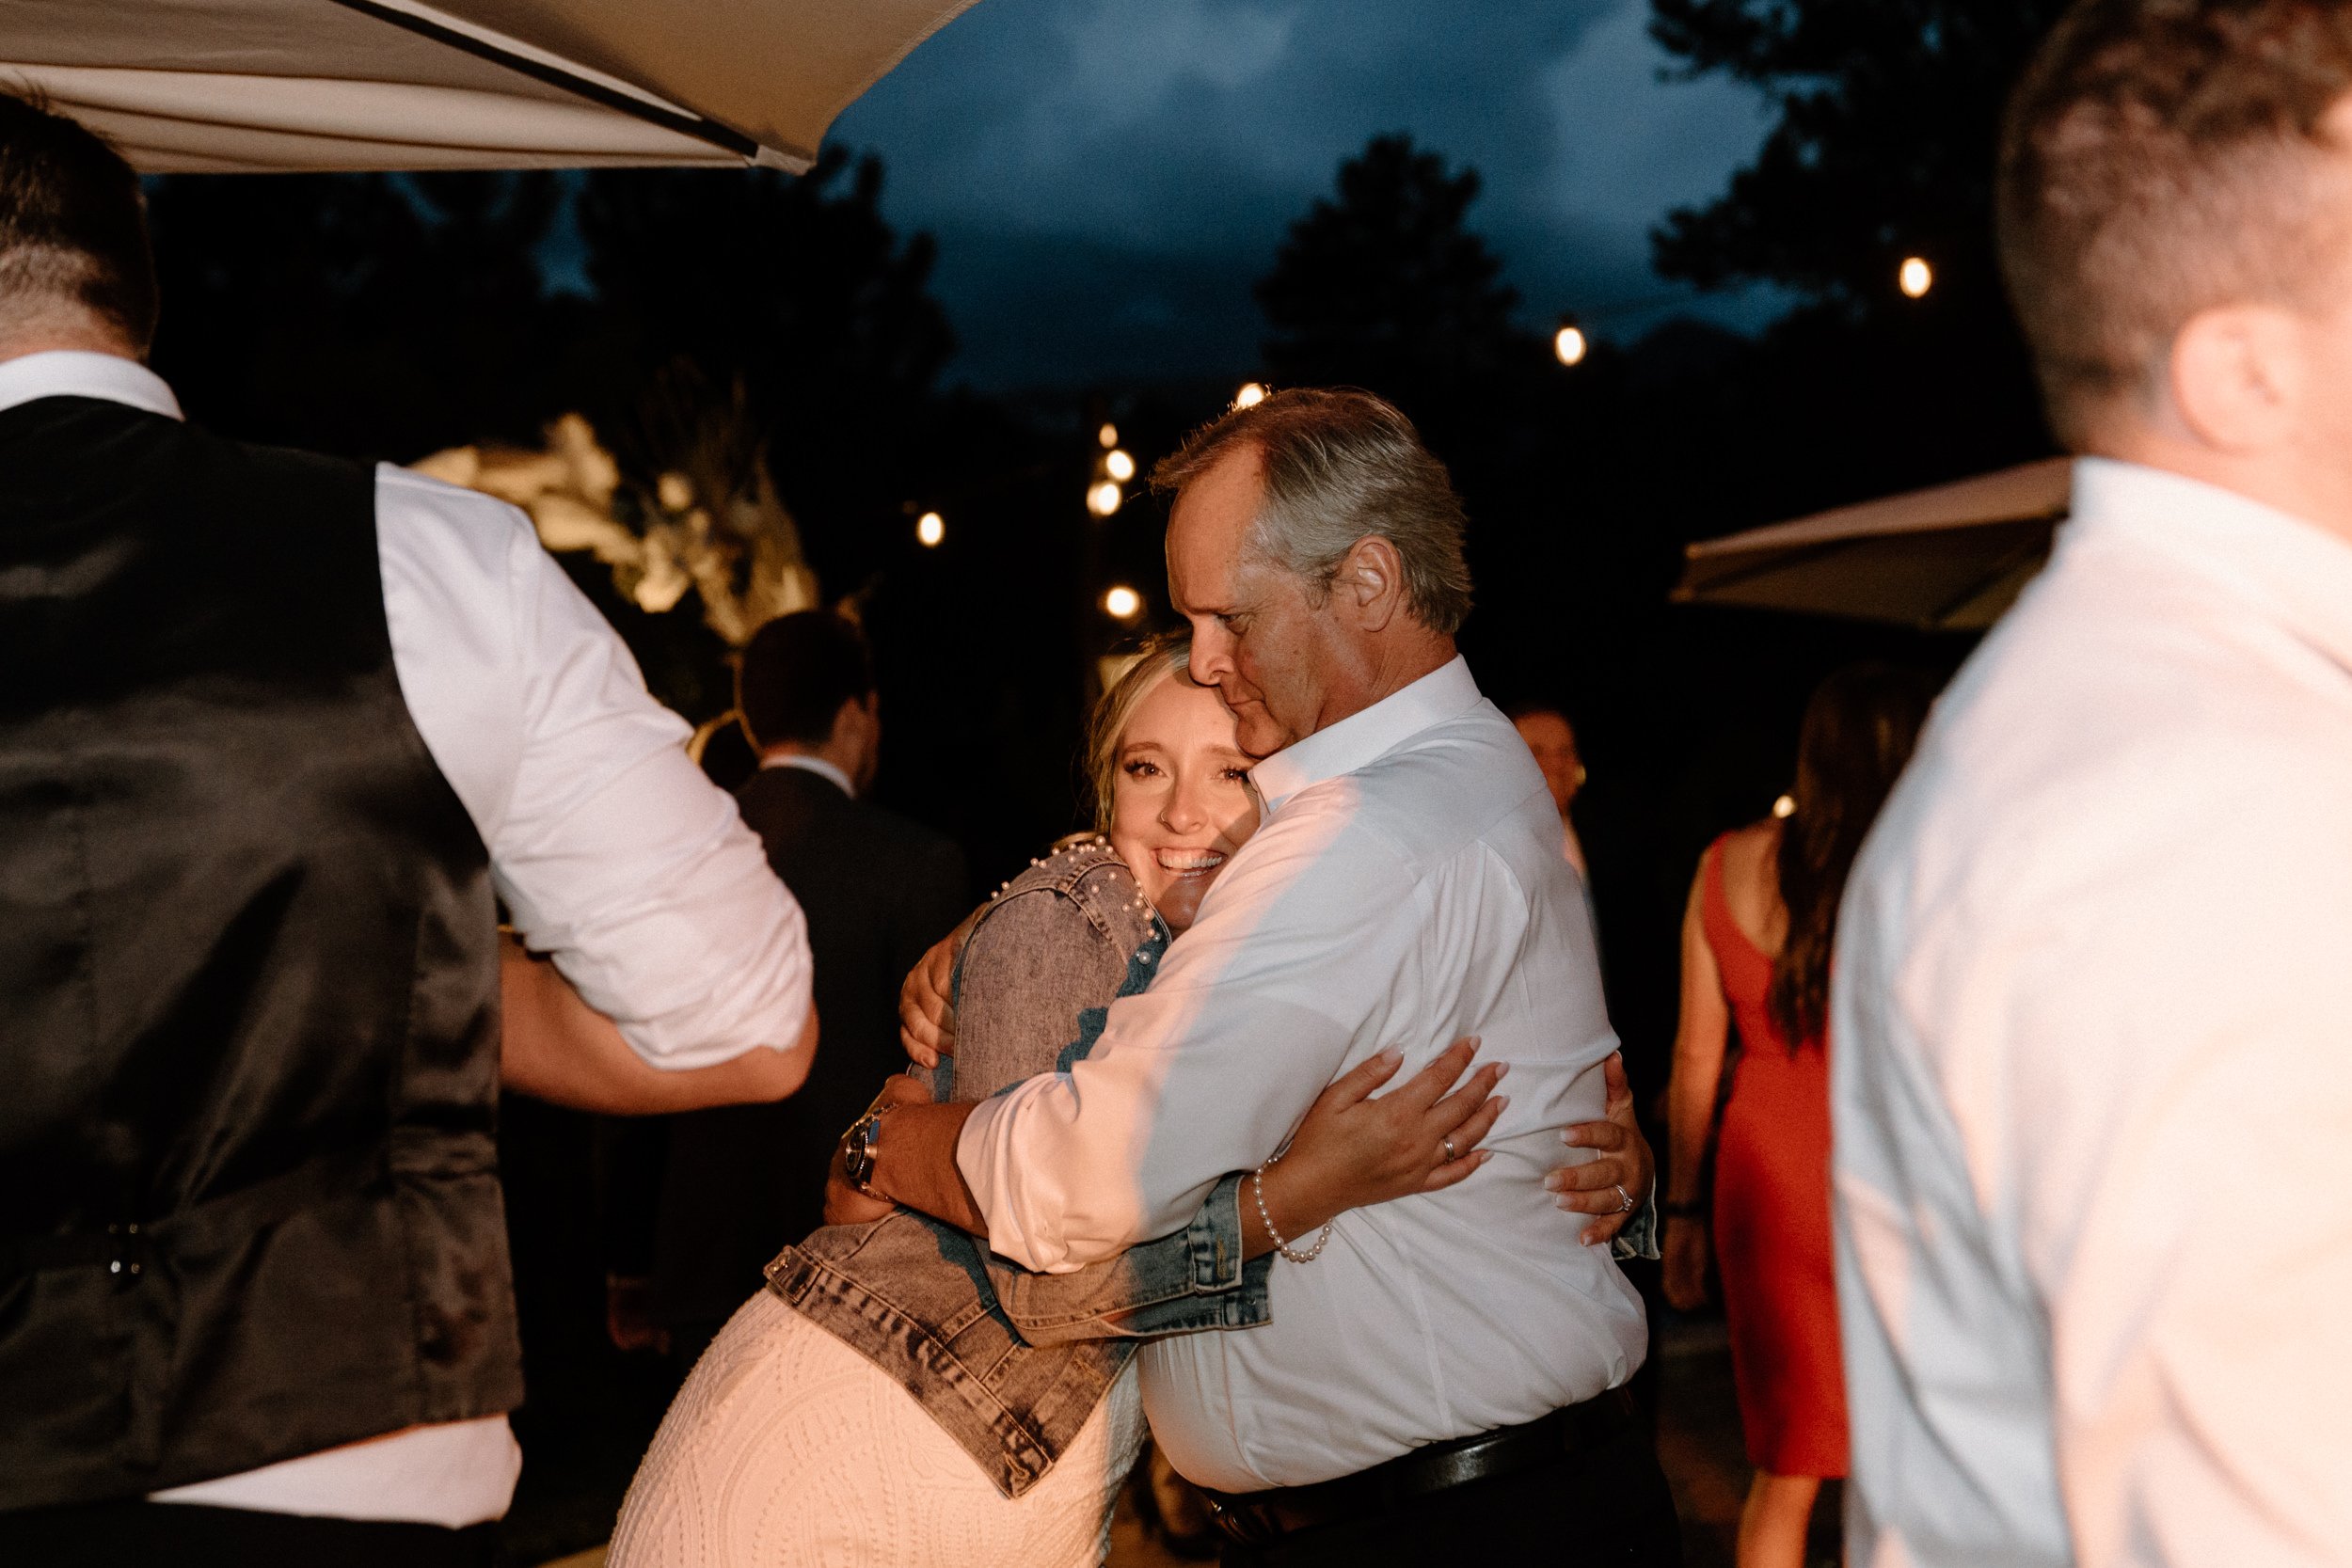 The bride hugs her father on the dance floor